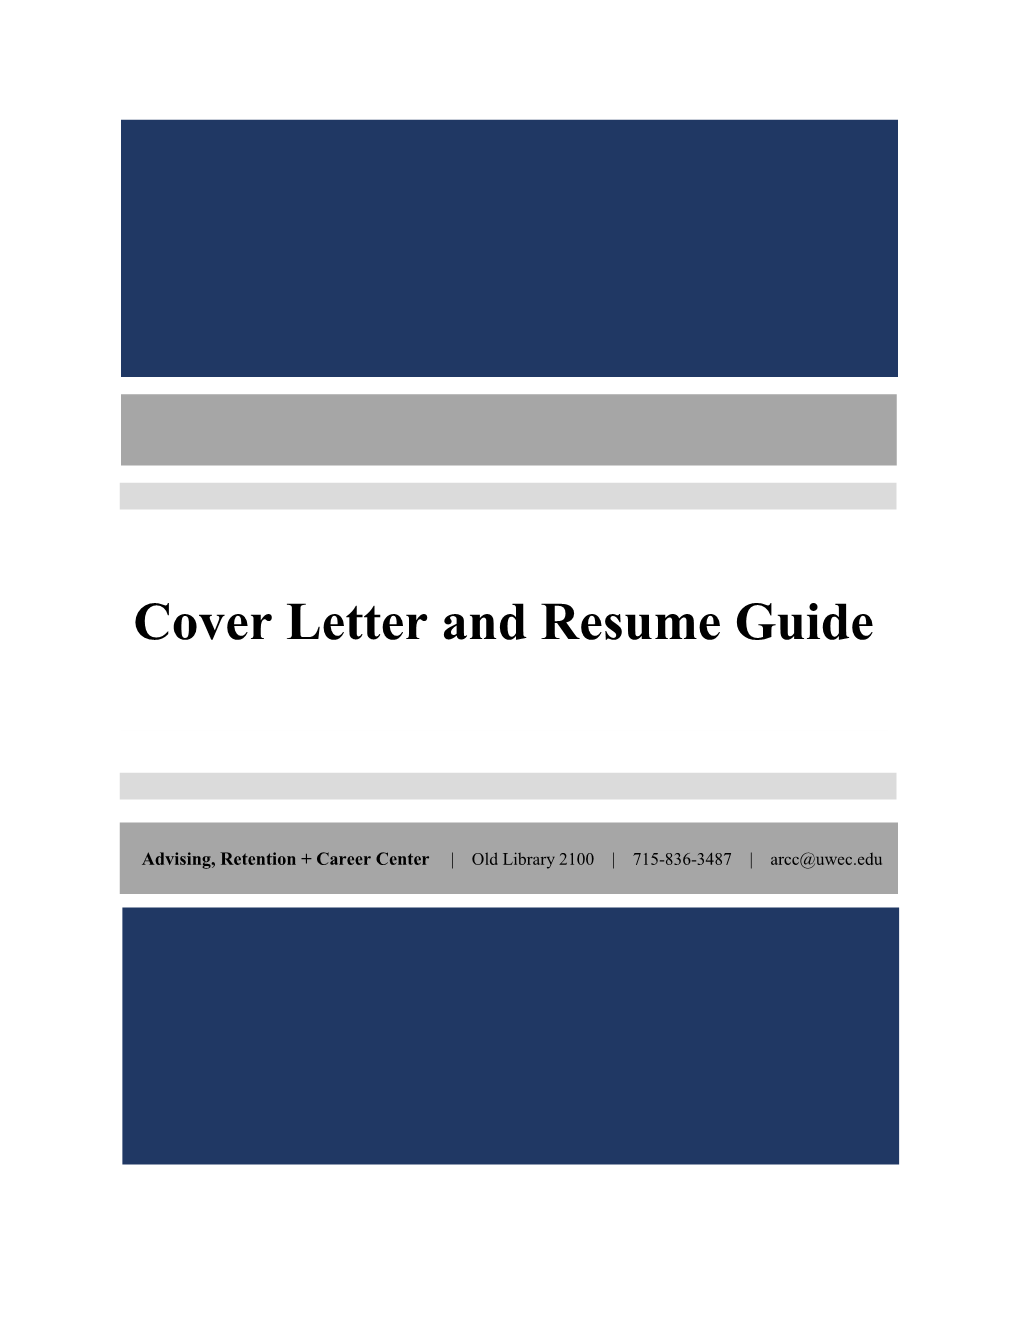 Cover Letter and Resume Guide